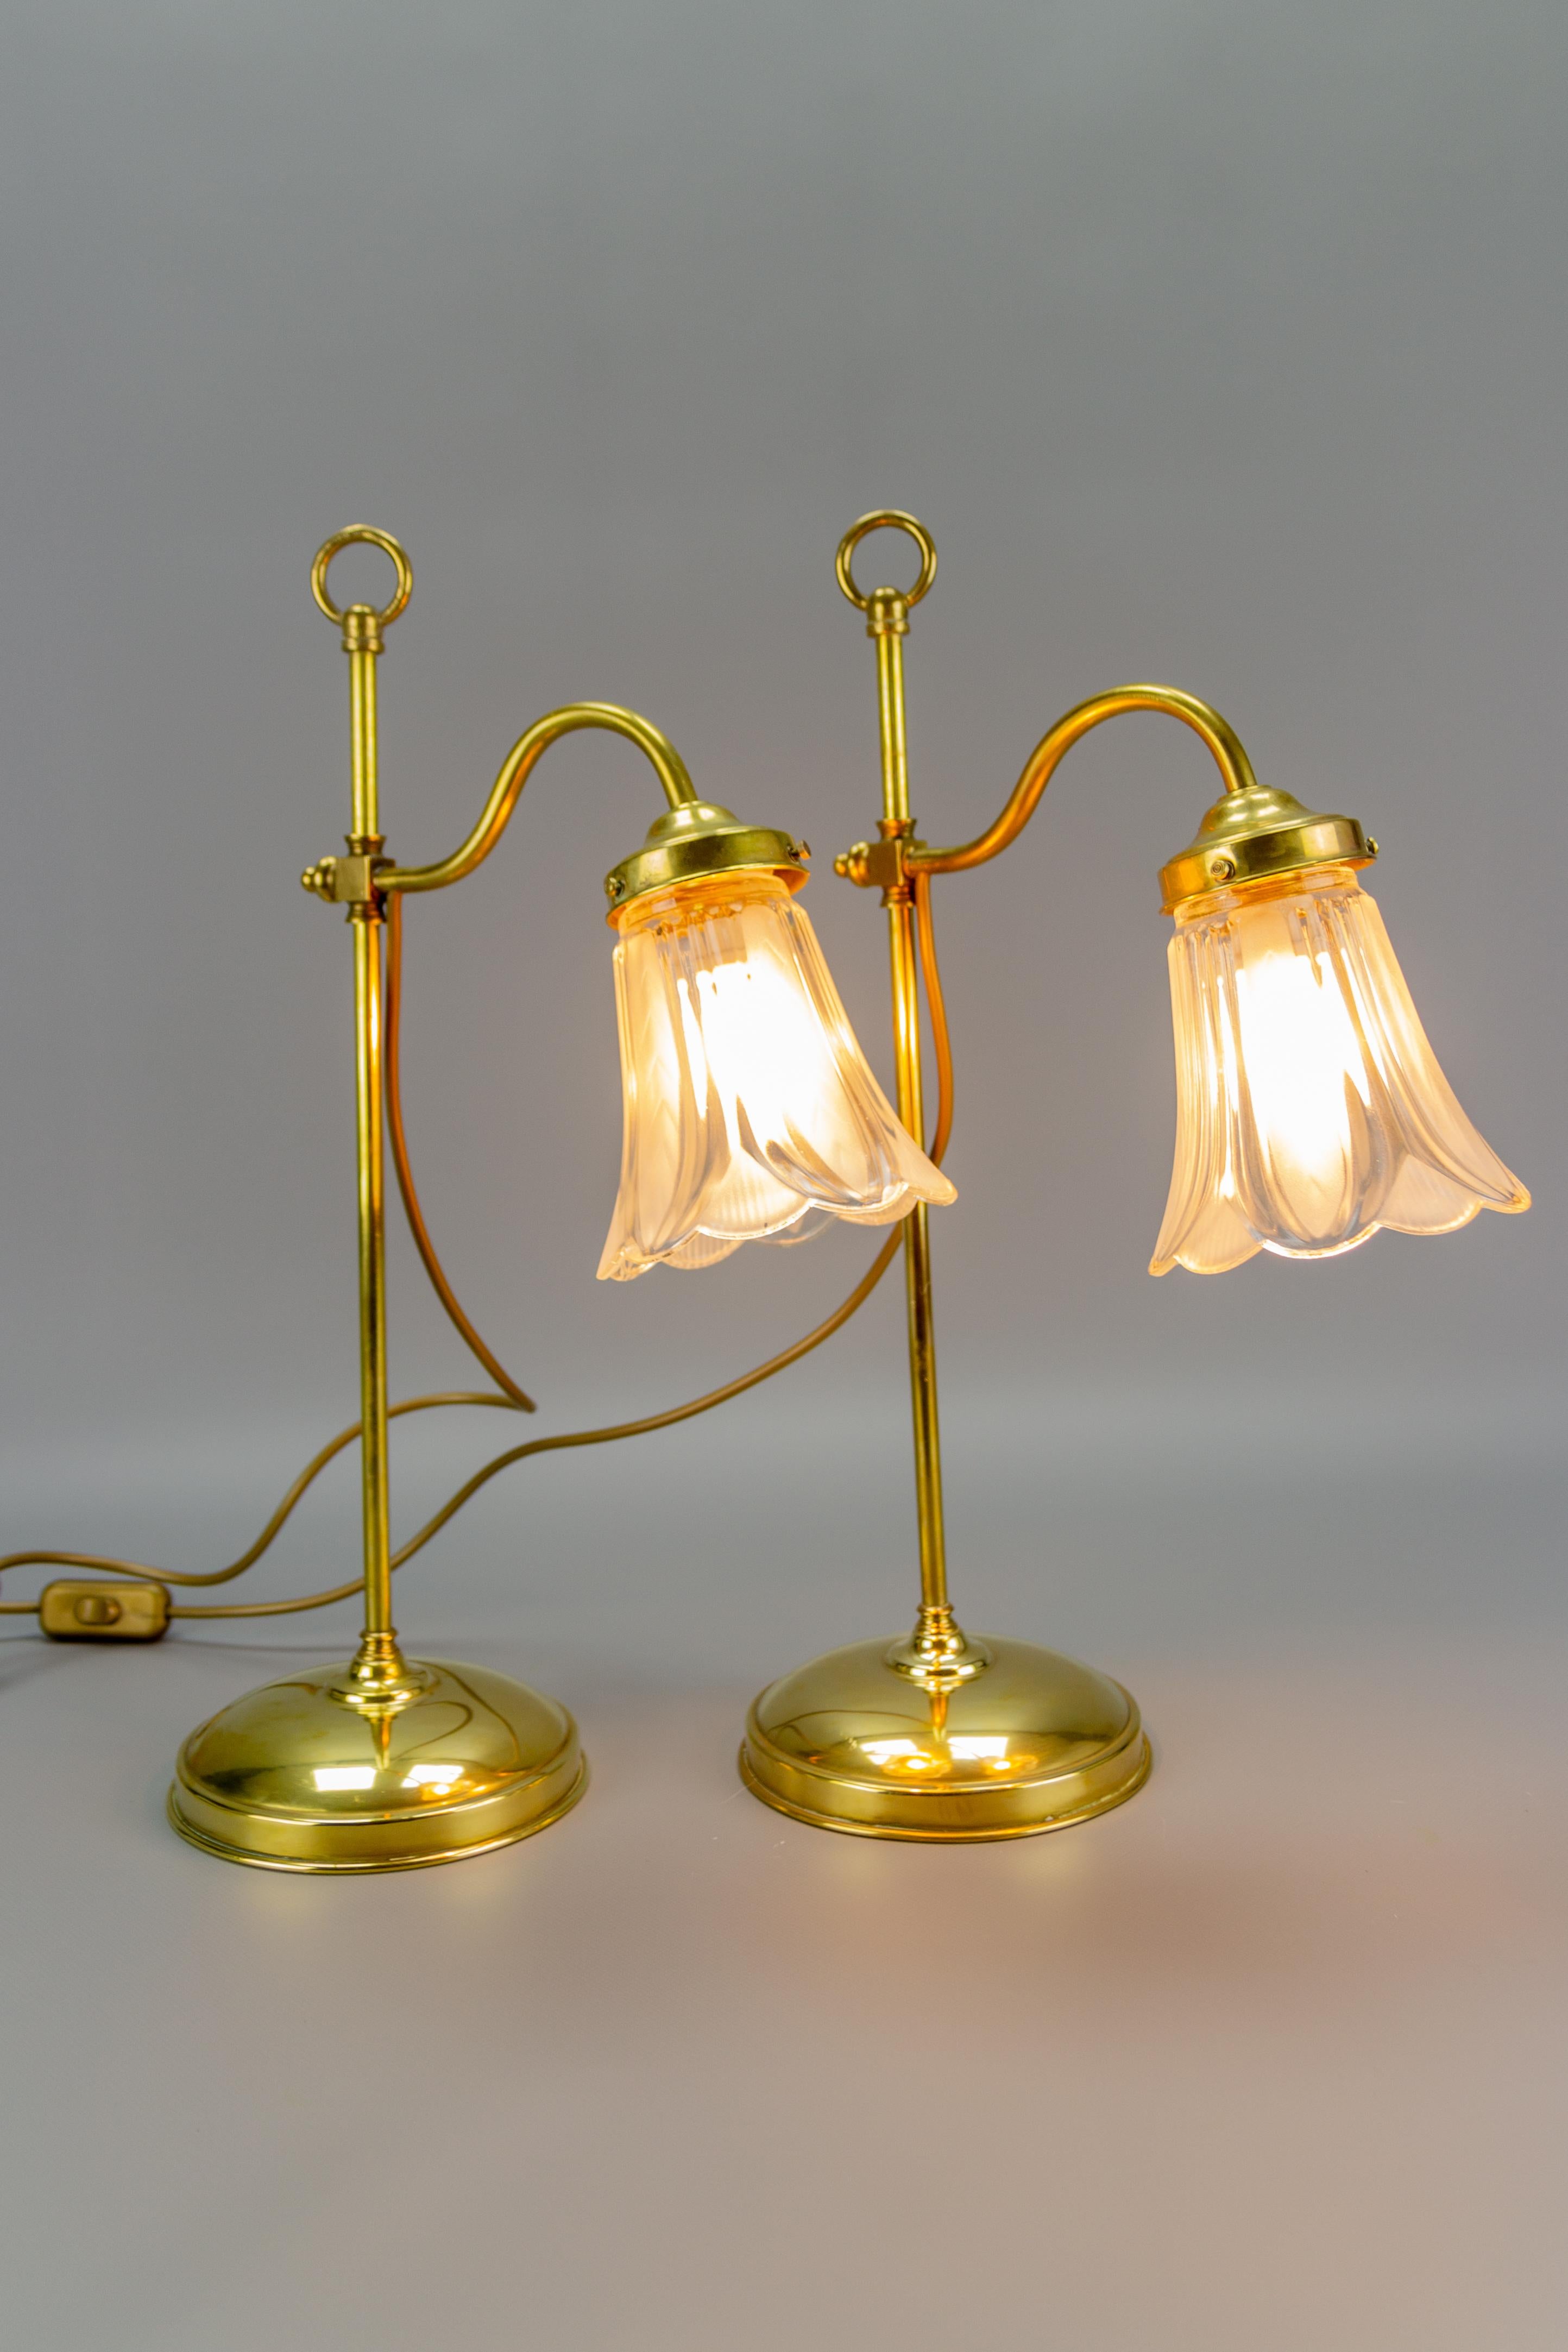 Set of two elegant Art Nouveau-style table lamps. Made from brass with a flower-shaped glass shade. Adjustable height, each with one socket for E27 (E26) size light bulb. France, 1930s. To the US will be shipped with adapters for the US wiring